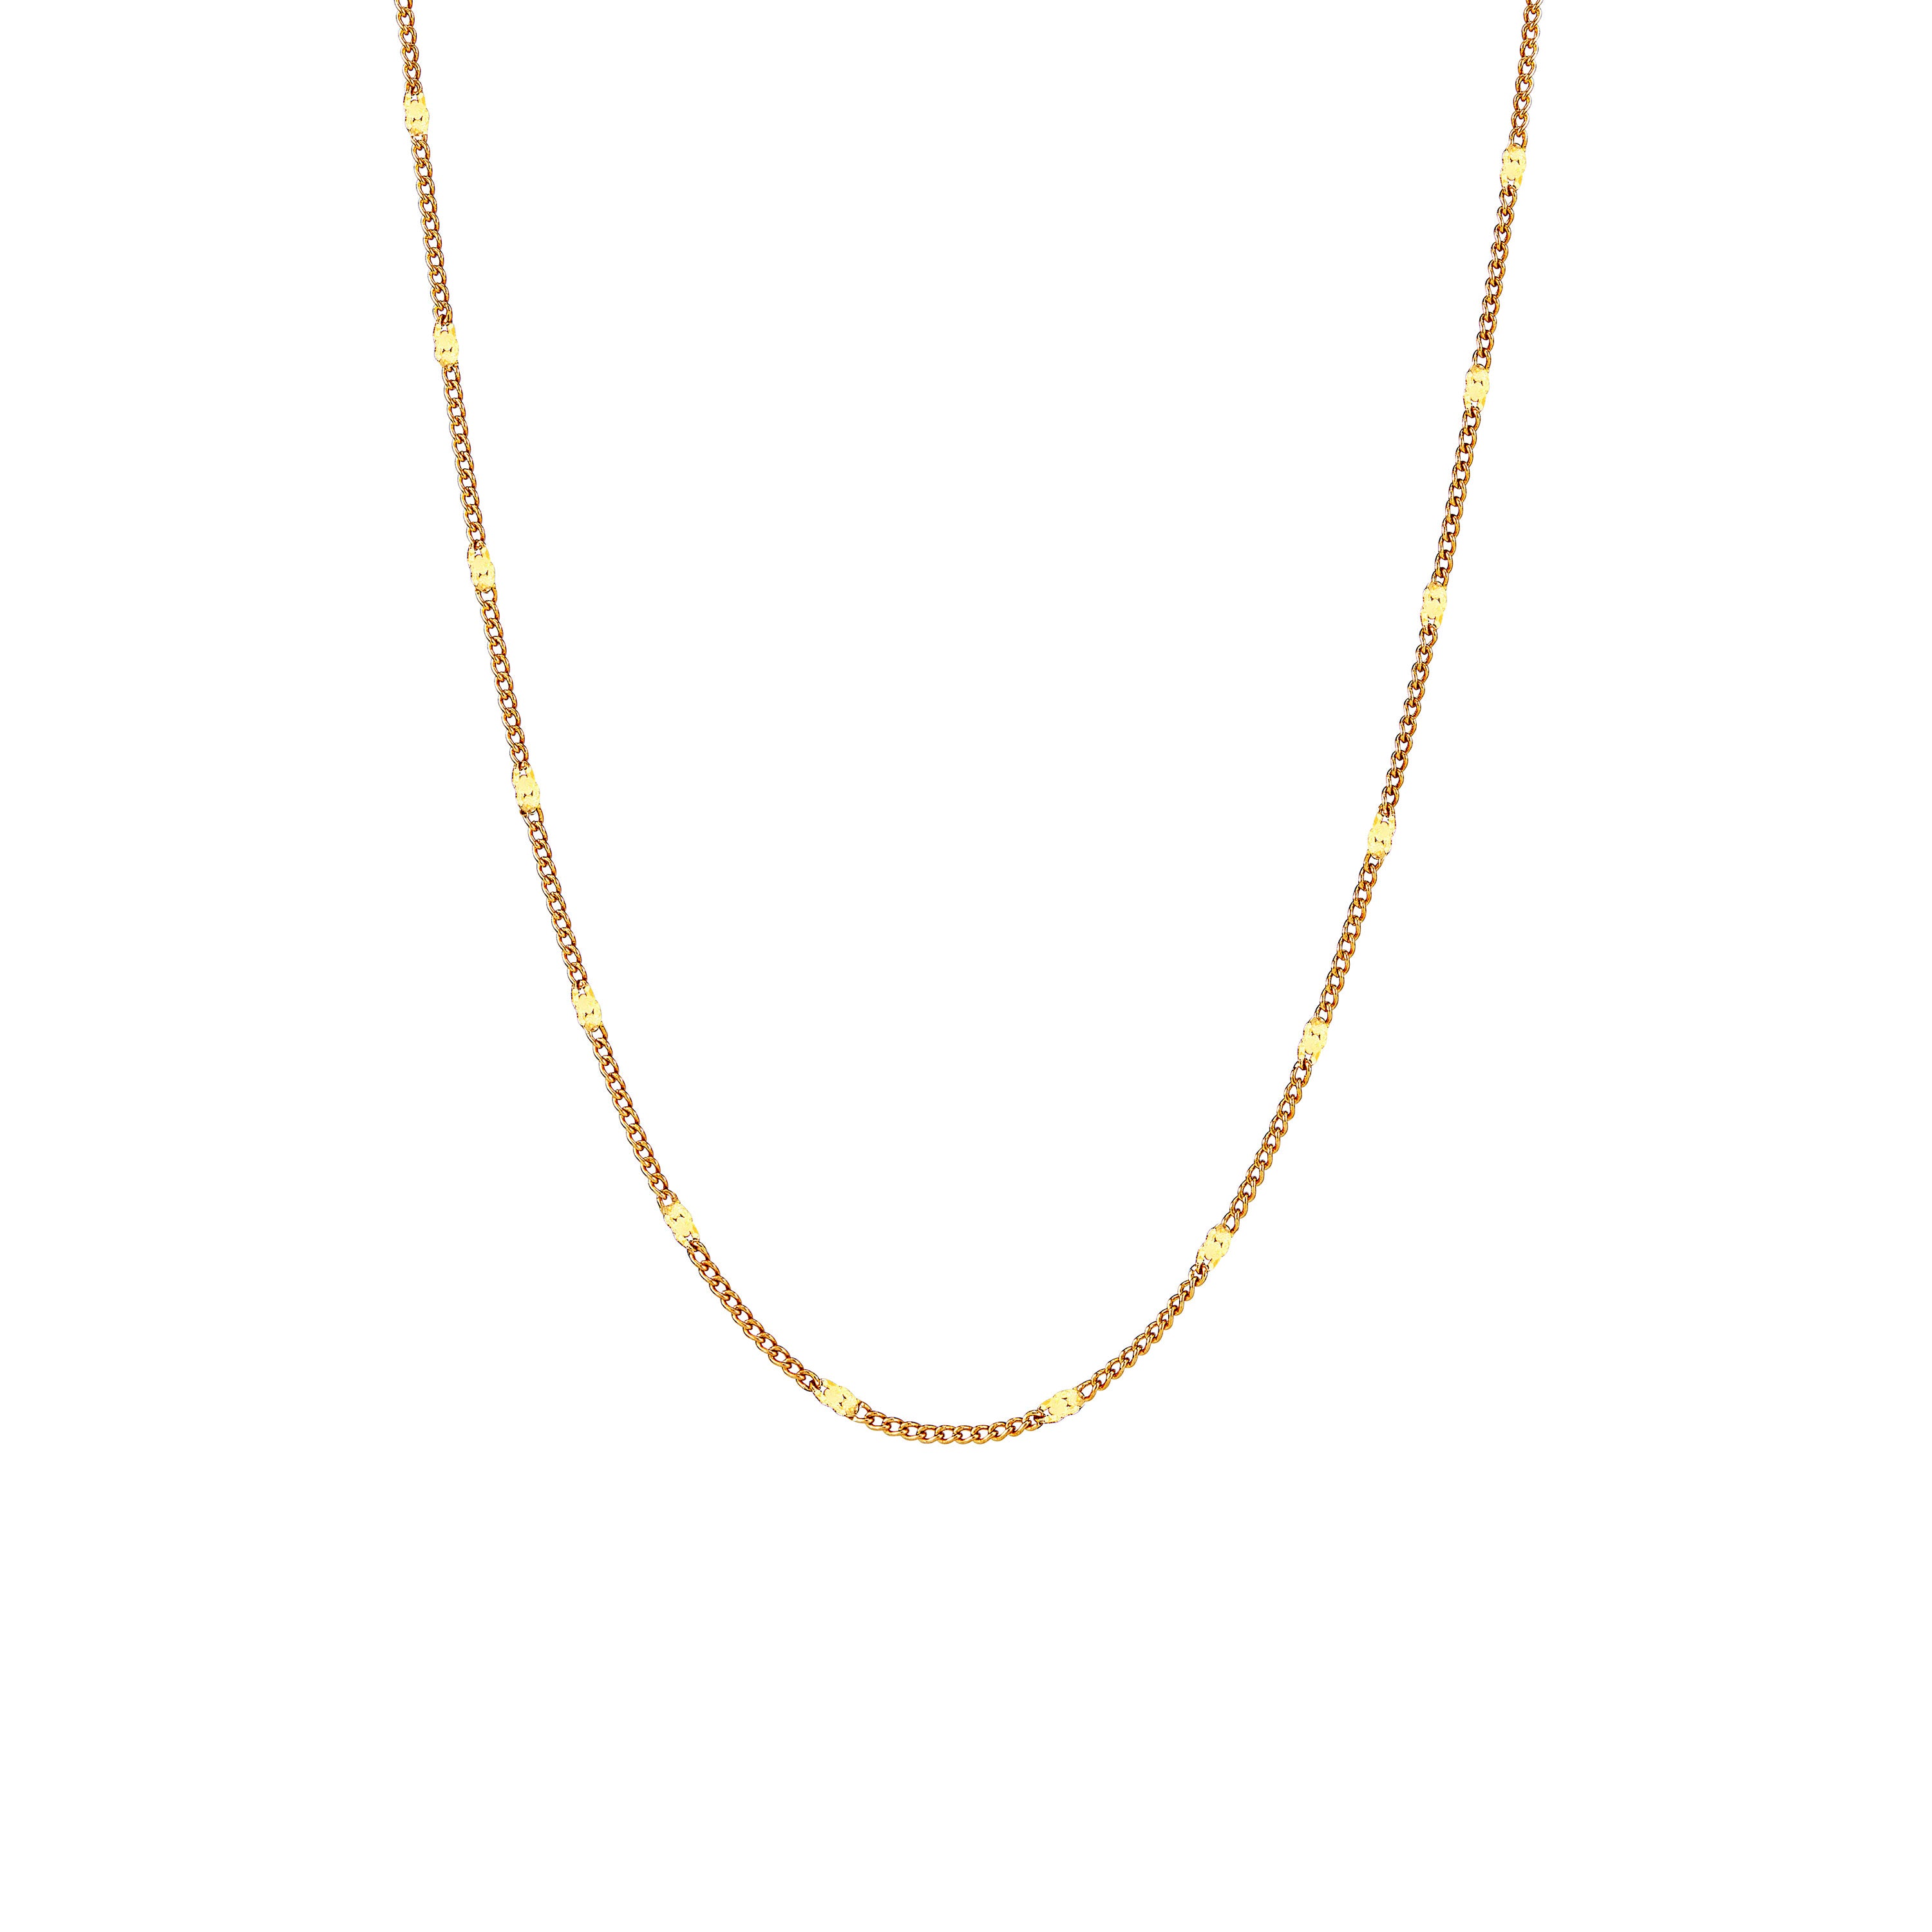 prysm-necklace-romy-gold-montreal-canada